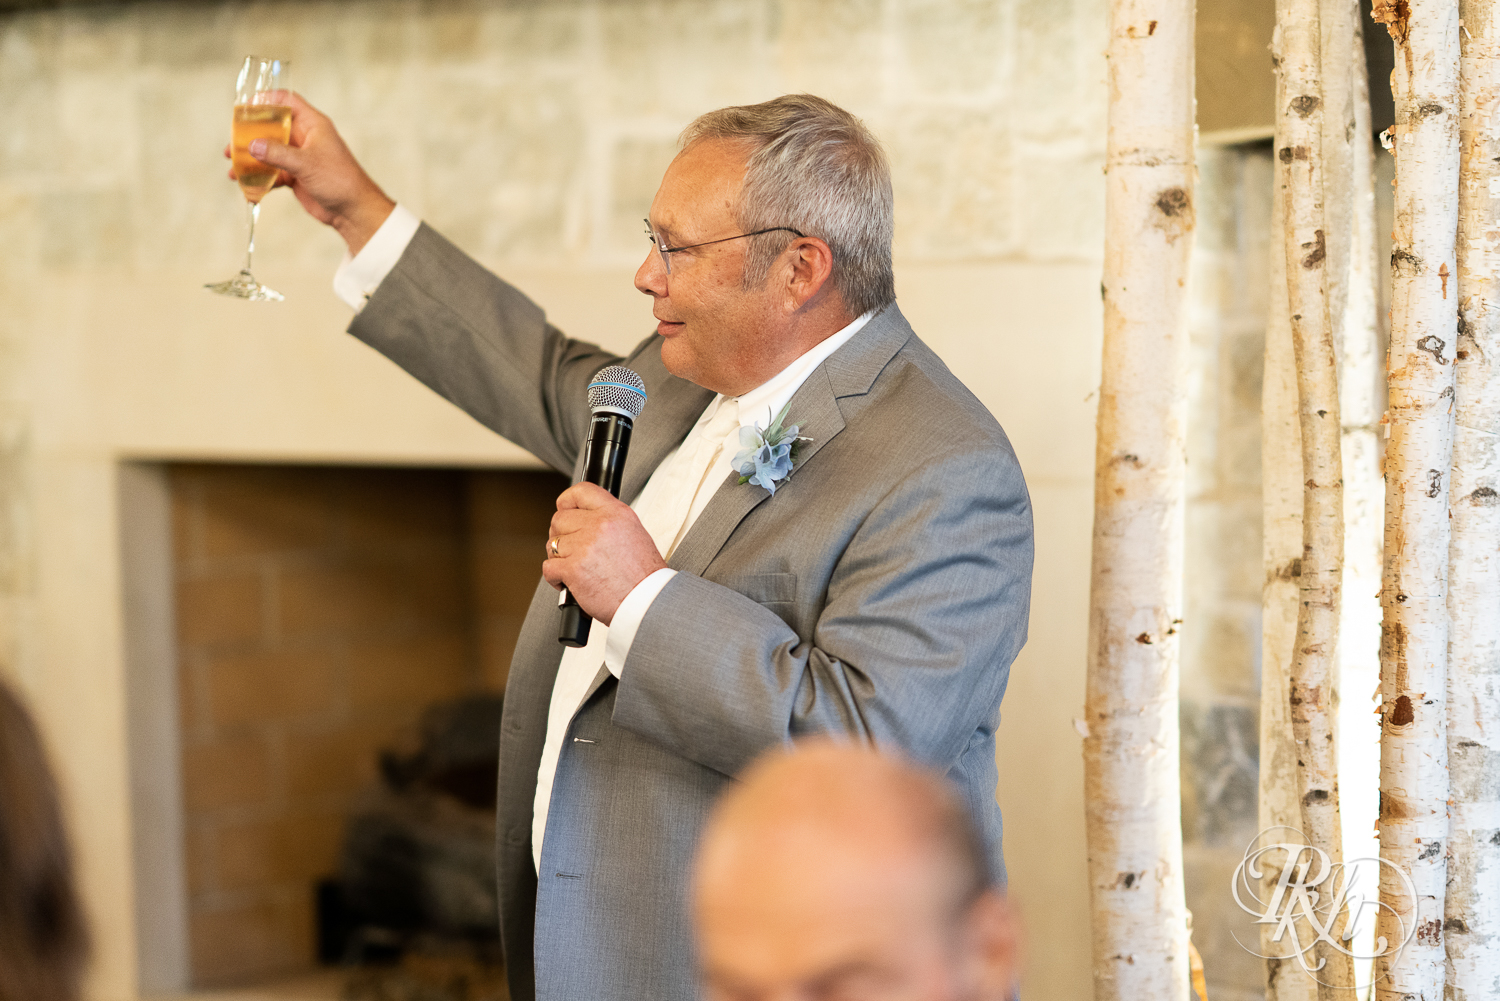 Father toasting with wine glass during wedding reception at 7 Vines Vineyard in Dellwood, Minnesota.